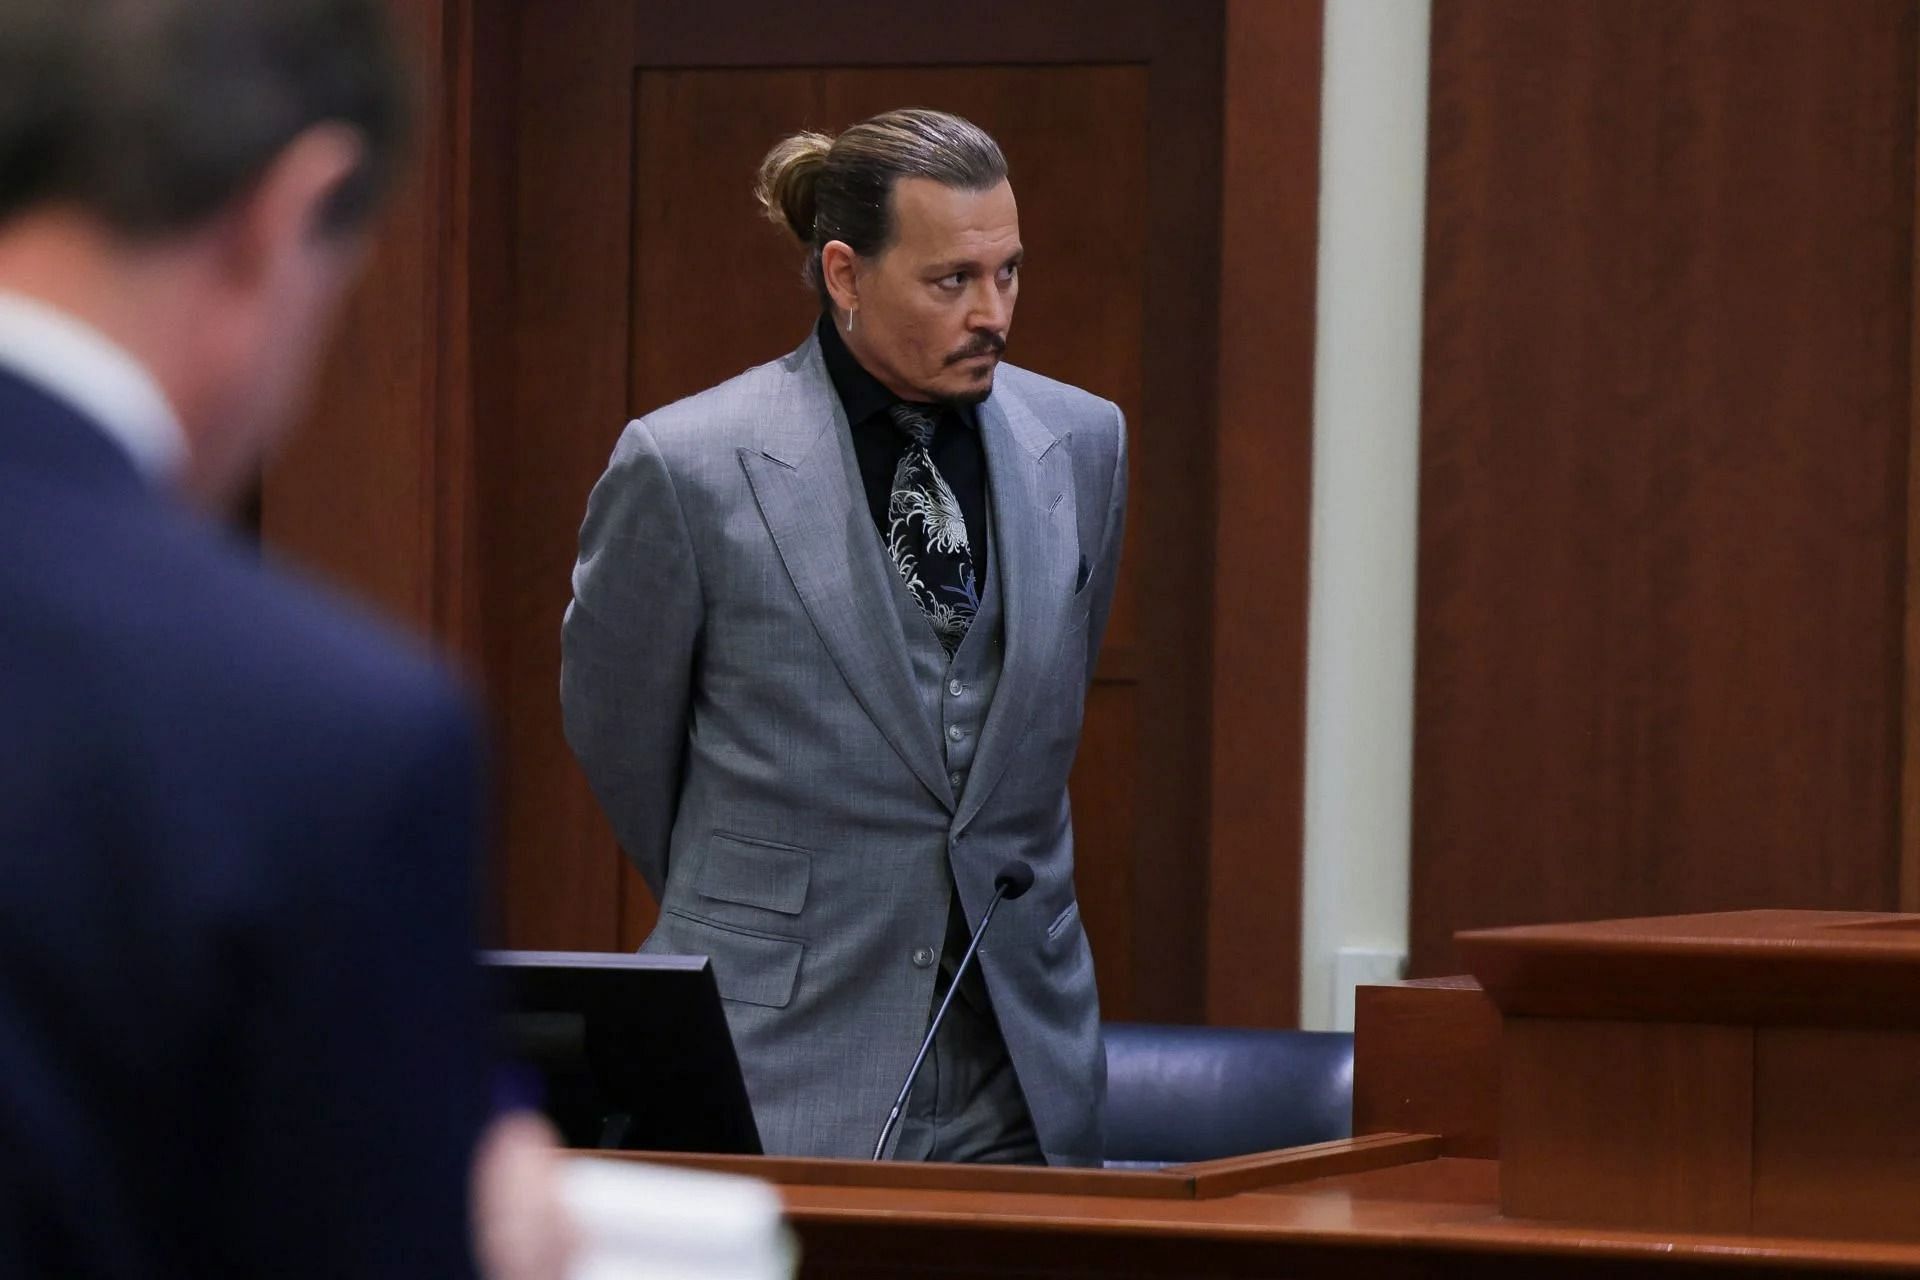 Johnny Depp at the trial (Image via Evelyn Hockstein/POOL/AFP/Getty Images)